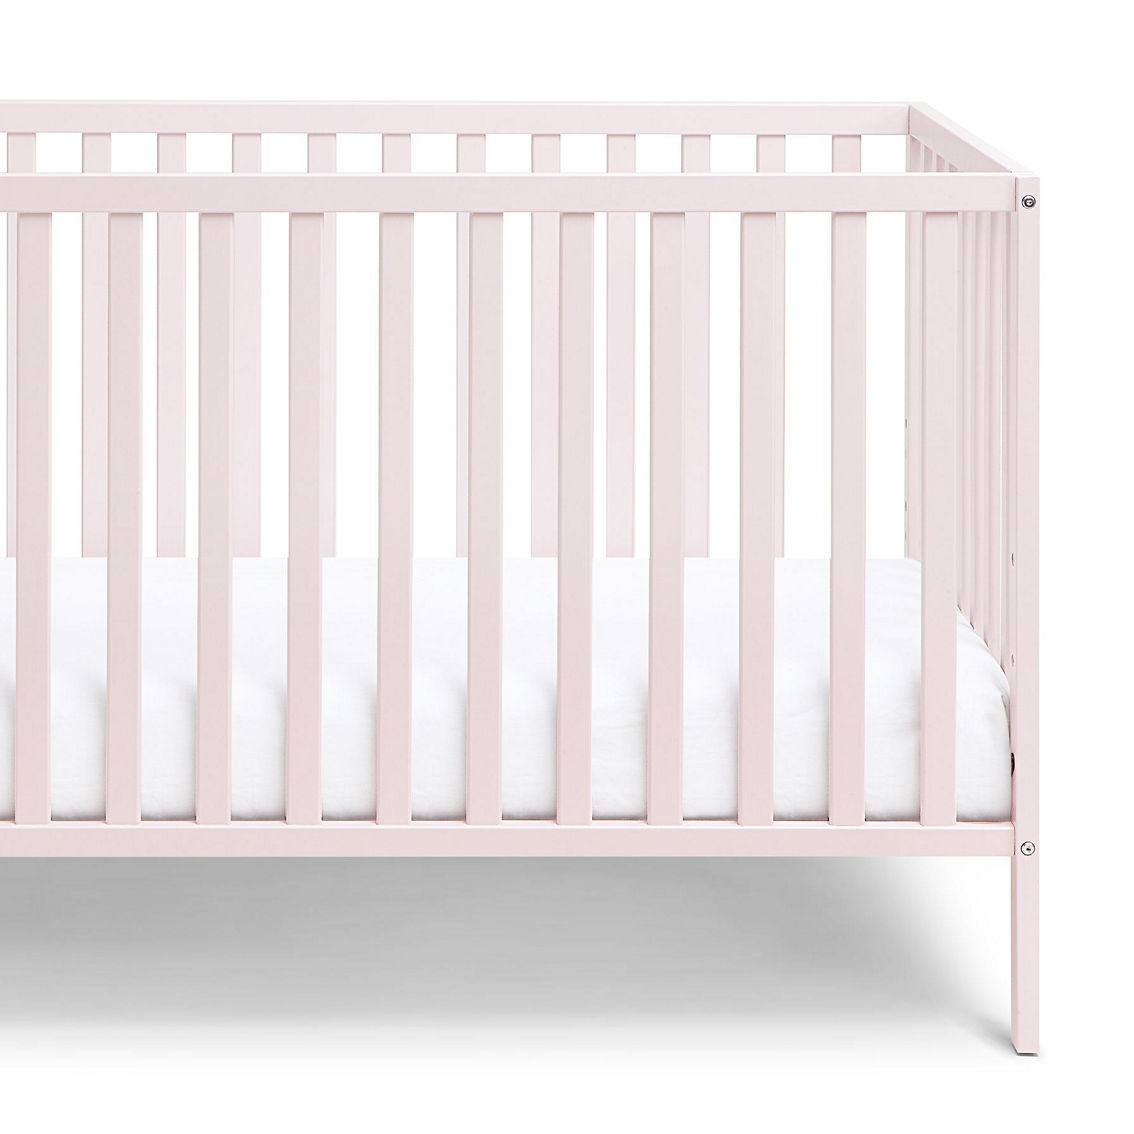 Suite Bebe Palmer 3-in-1 Convertible Island Crib Pastel Pink - Image 2 of 5